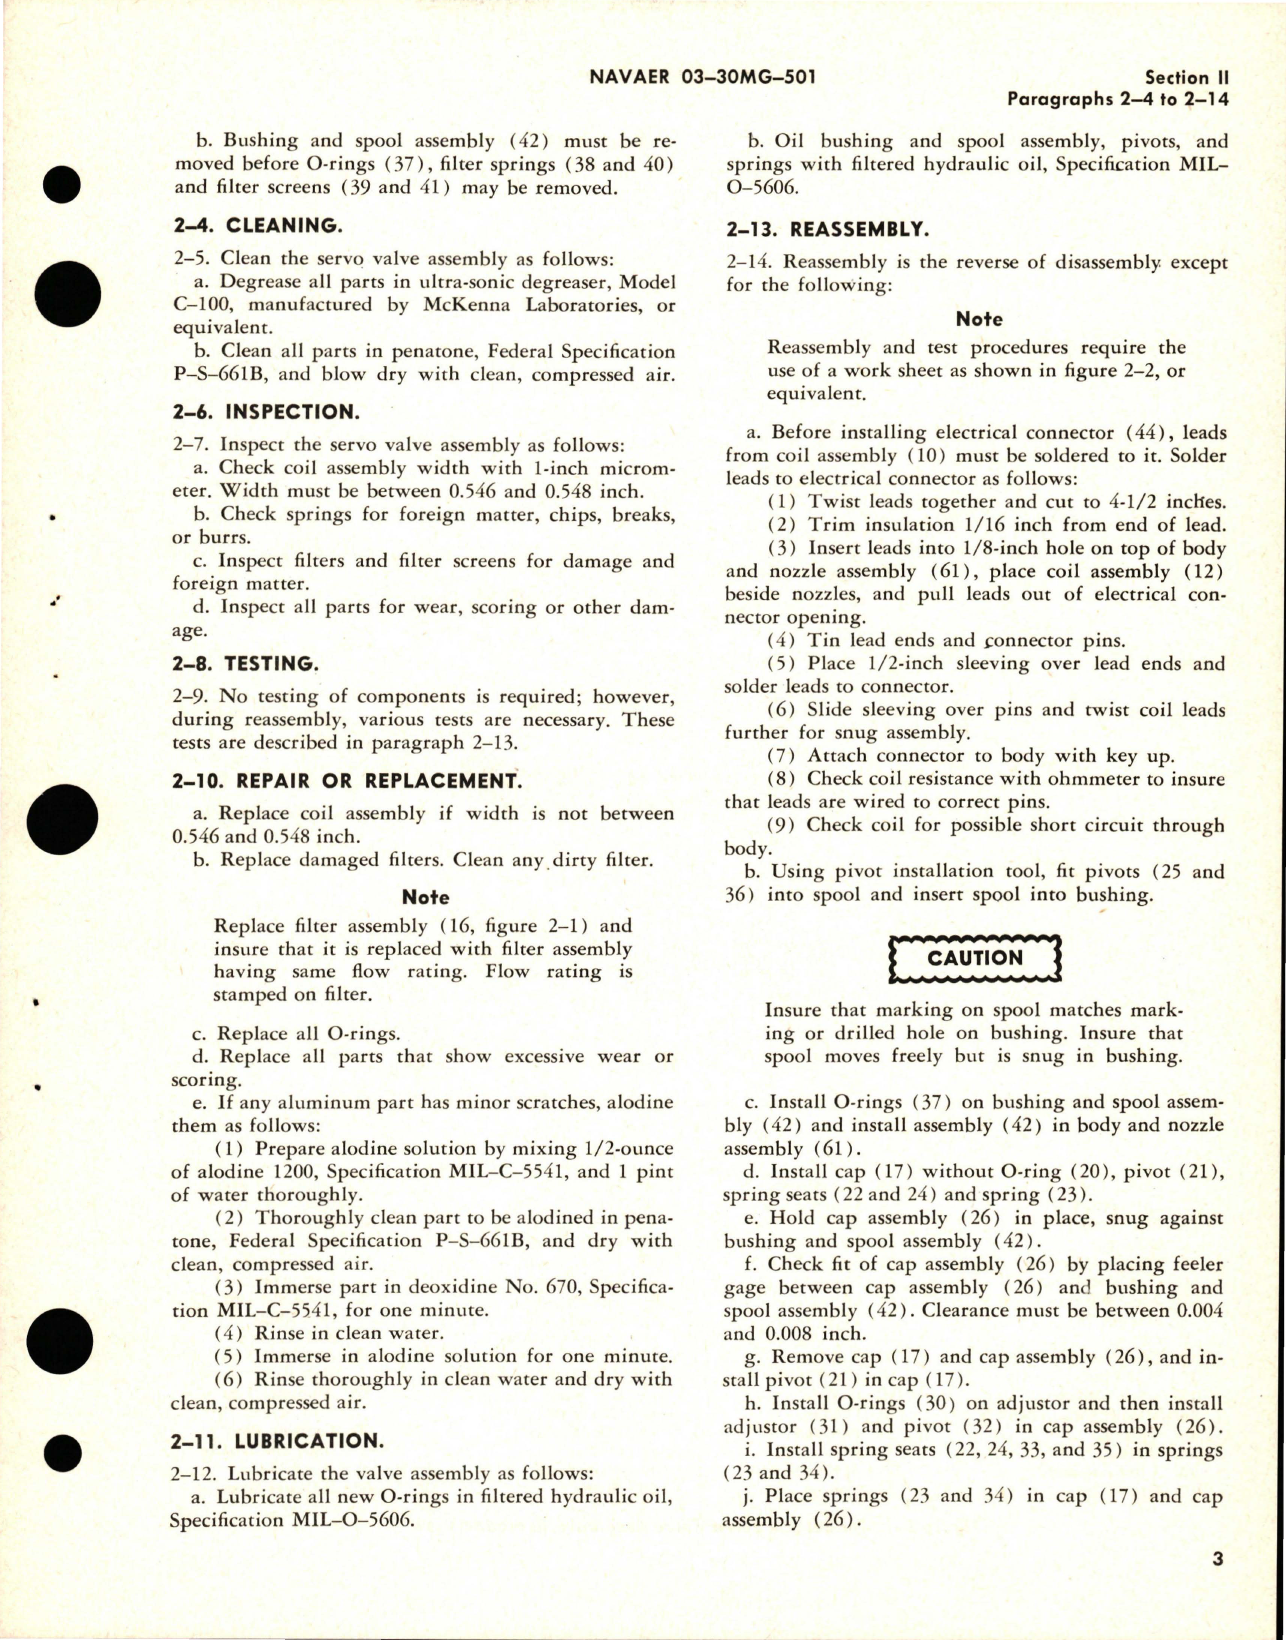 Sample page 7 from AirCorps Library document: Overhaul Instructions for Servo Valve Assembly - Model 564, 564A, and 571A